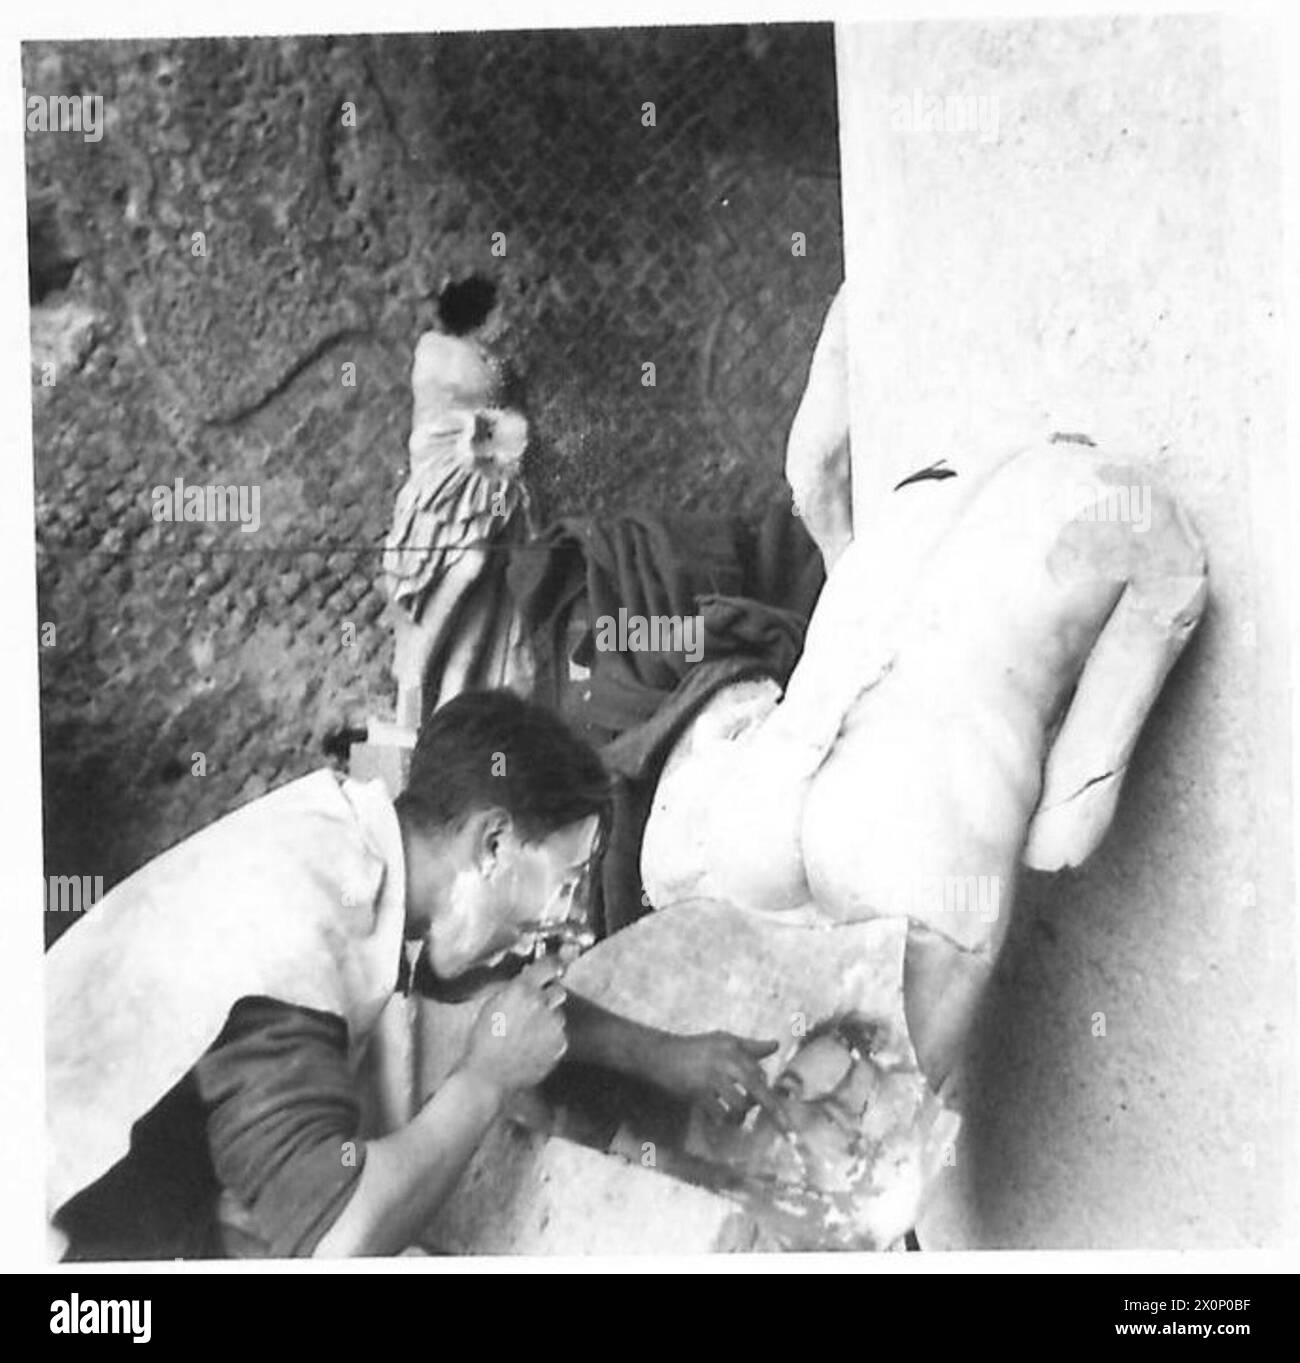 THE BRITISH ARMY IN NORTH AFRICA, SICILY, ITALY, THE BALKANS AND AUSTRIA 1942-1946 - Rfn. R. Dean of Shepherds Bush, London make use of a statue to support his mirror whilst shaving. Photographic negative , British Army Stock Photo